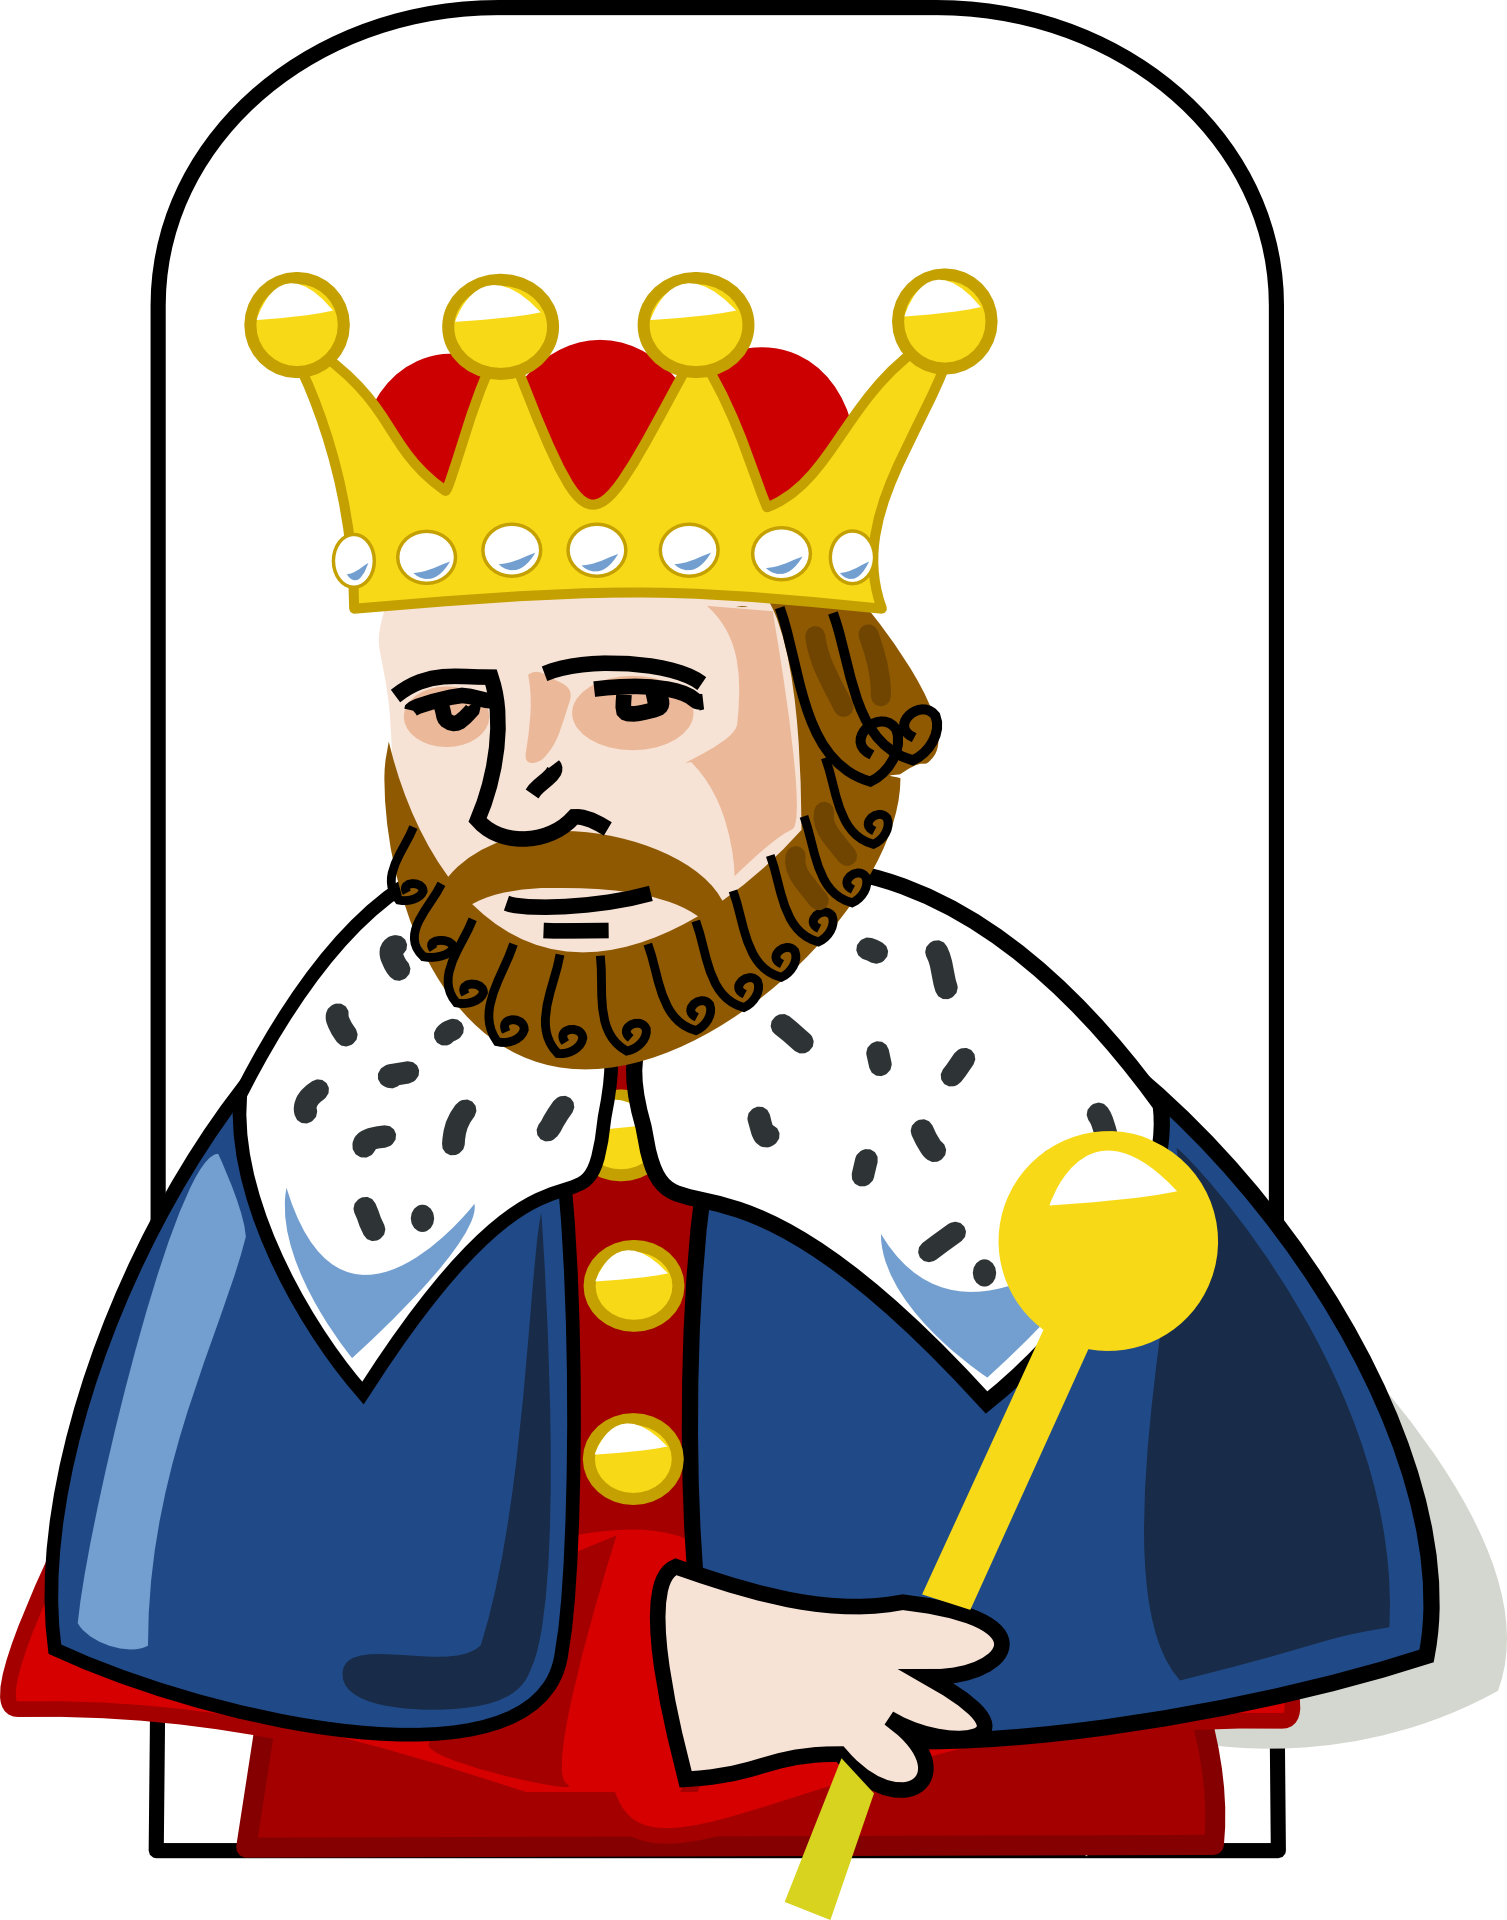 crown clipart scepter